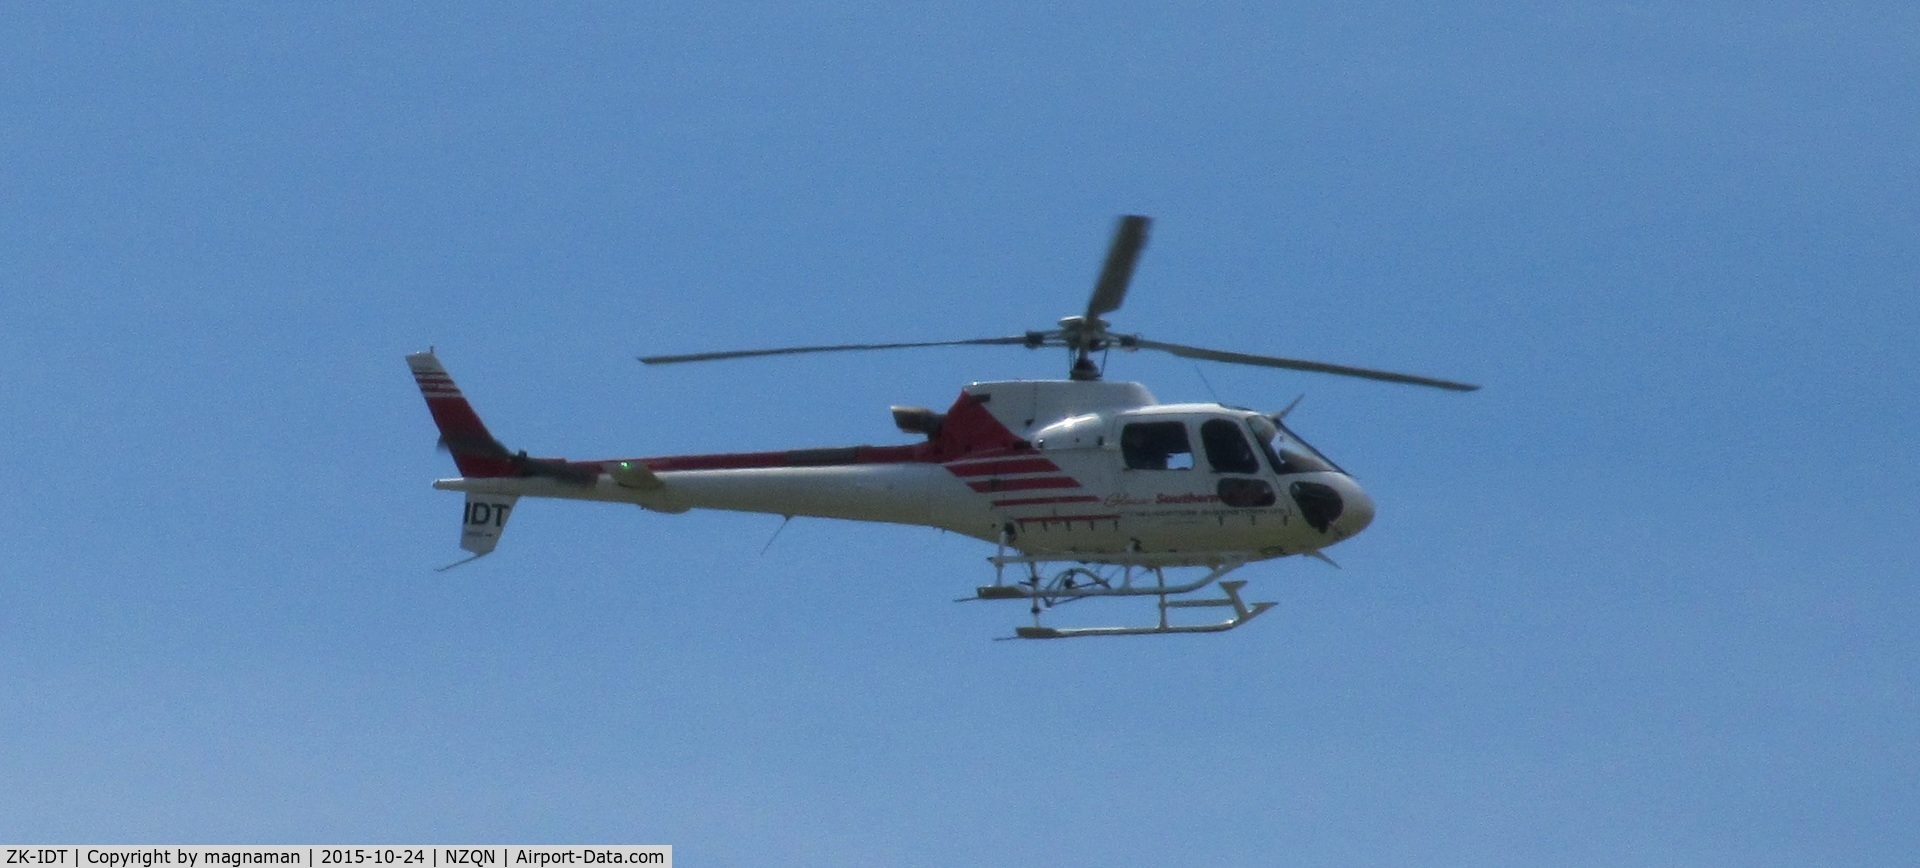 ZK-IDT, Eurocopter AS-350B-3 Ecureuil Ecureuil C/N 7721, Coming in to land at QN